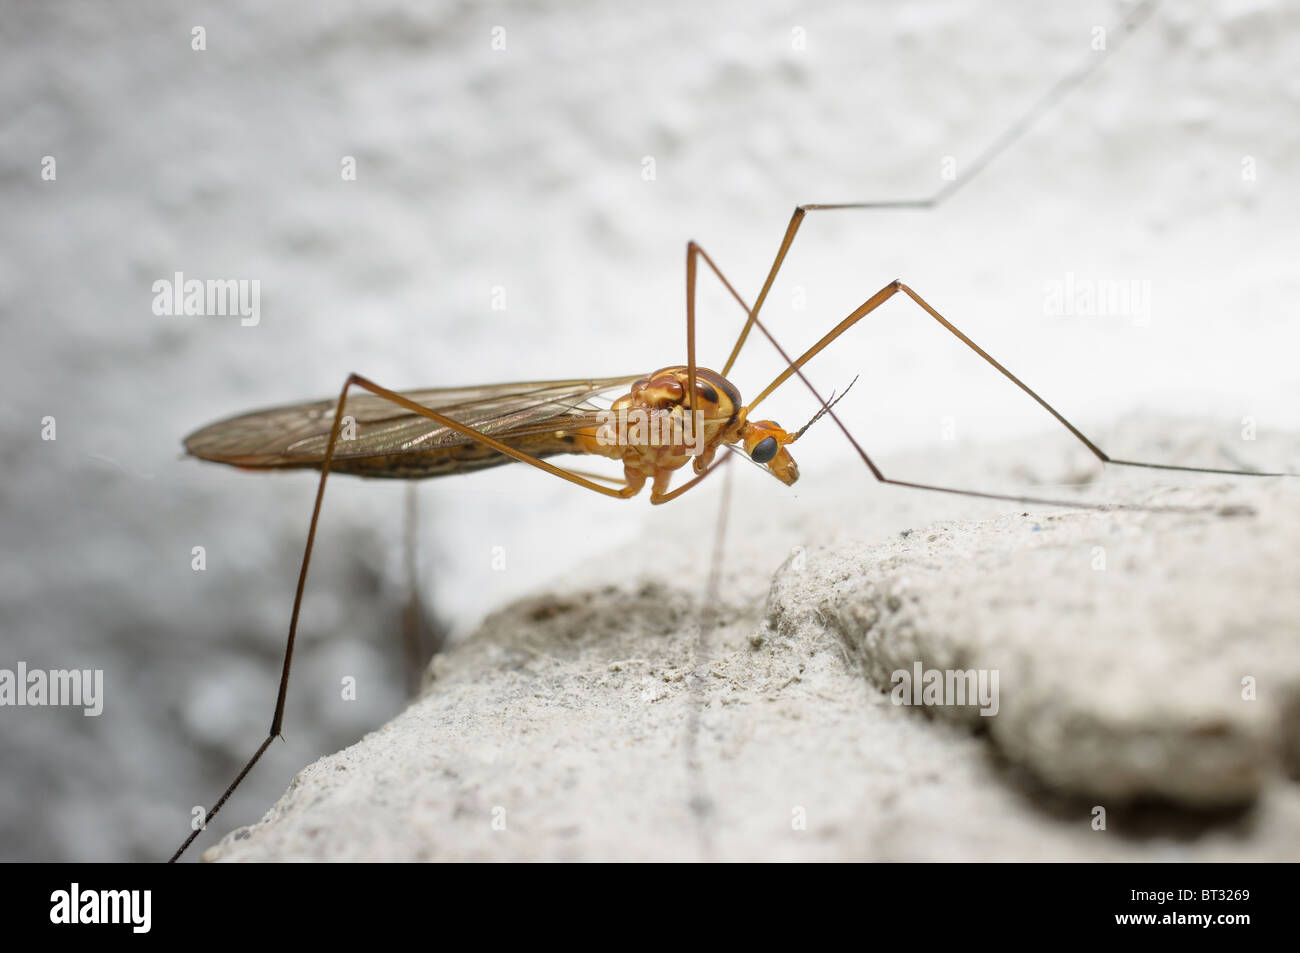 Close up photo of a daddy long legs (Crane fly) Stock Photo